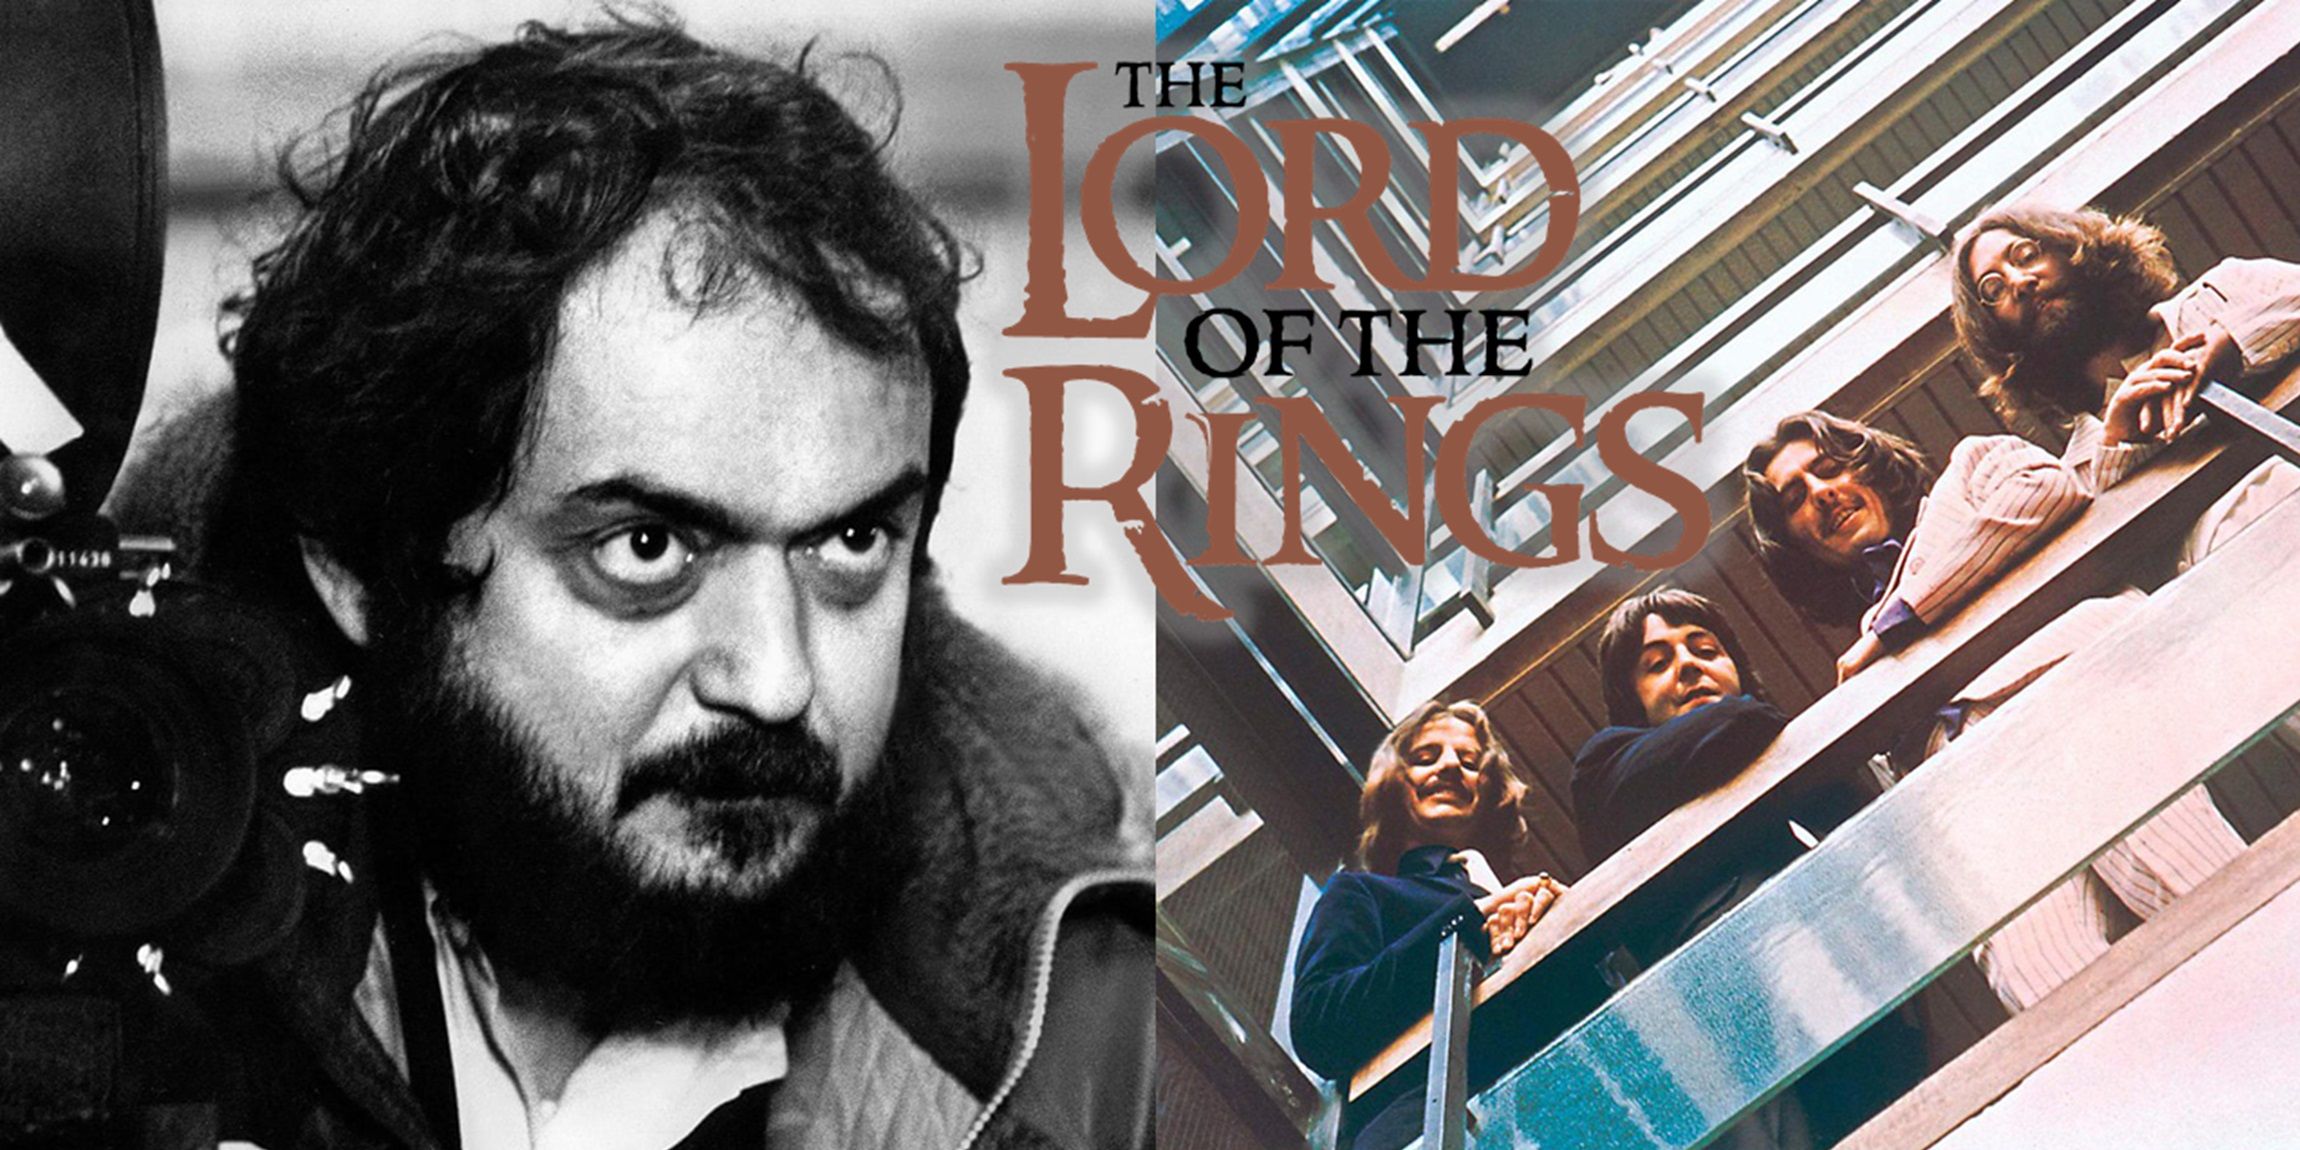 The Beatles Stanley Kubrick Lord of the Rings